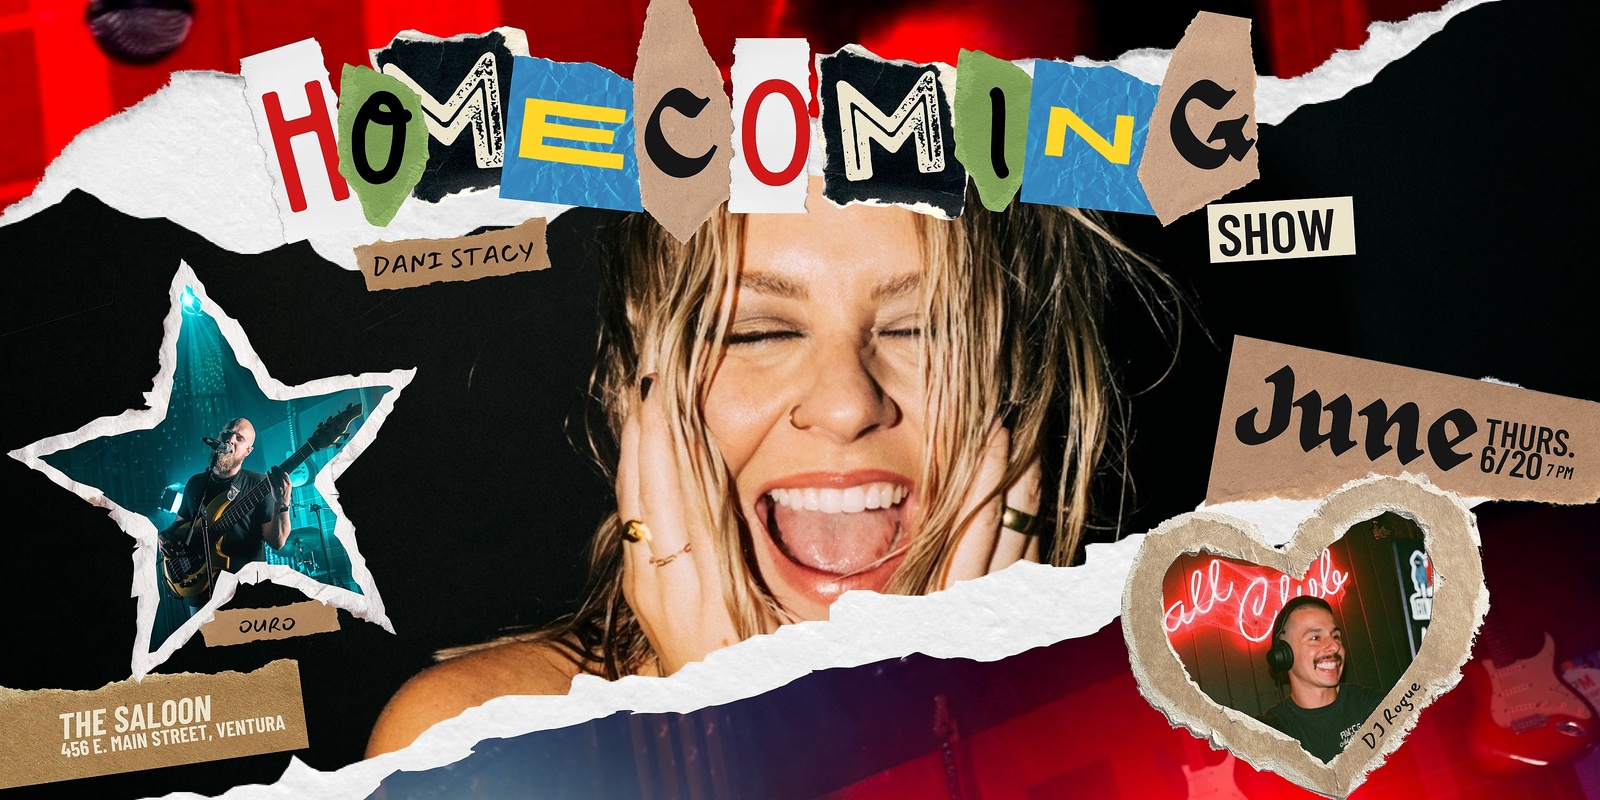 Banner image for Homecoming Show -Dani Stacy, Ouro, DJ Rogue